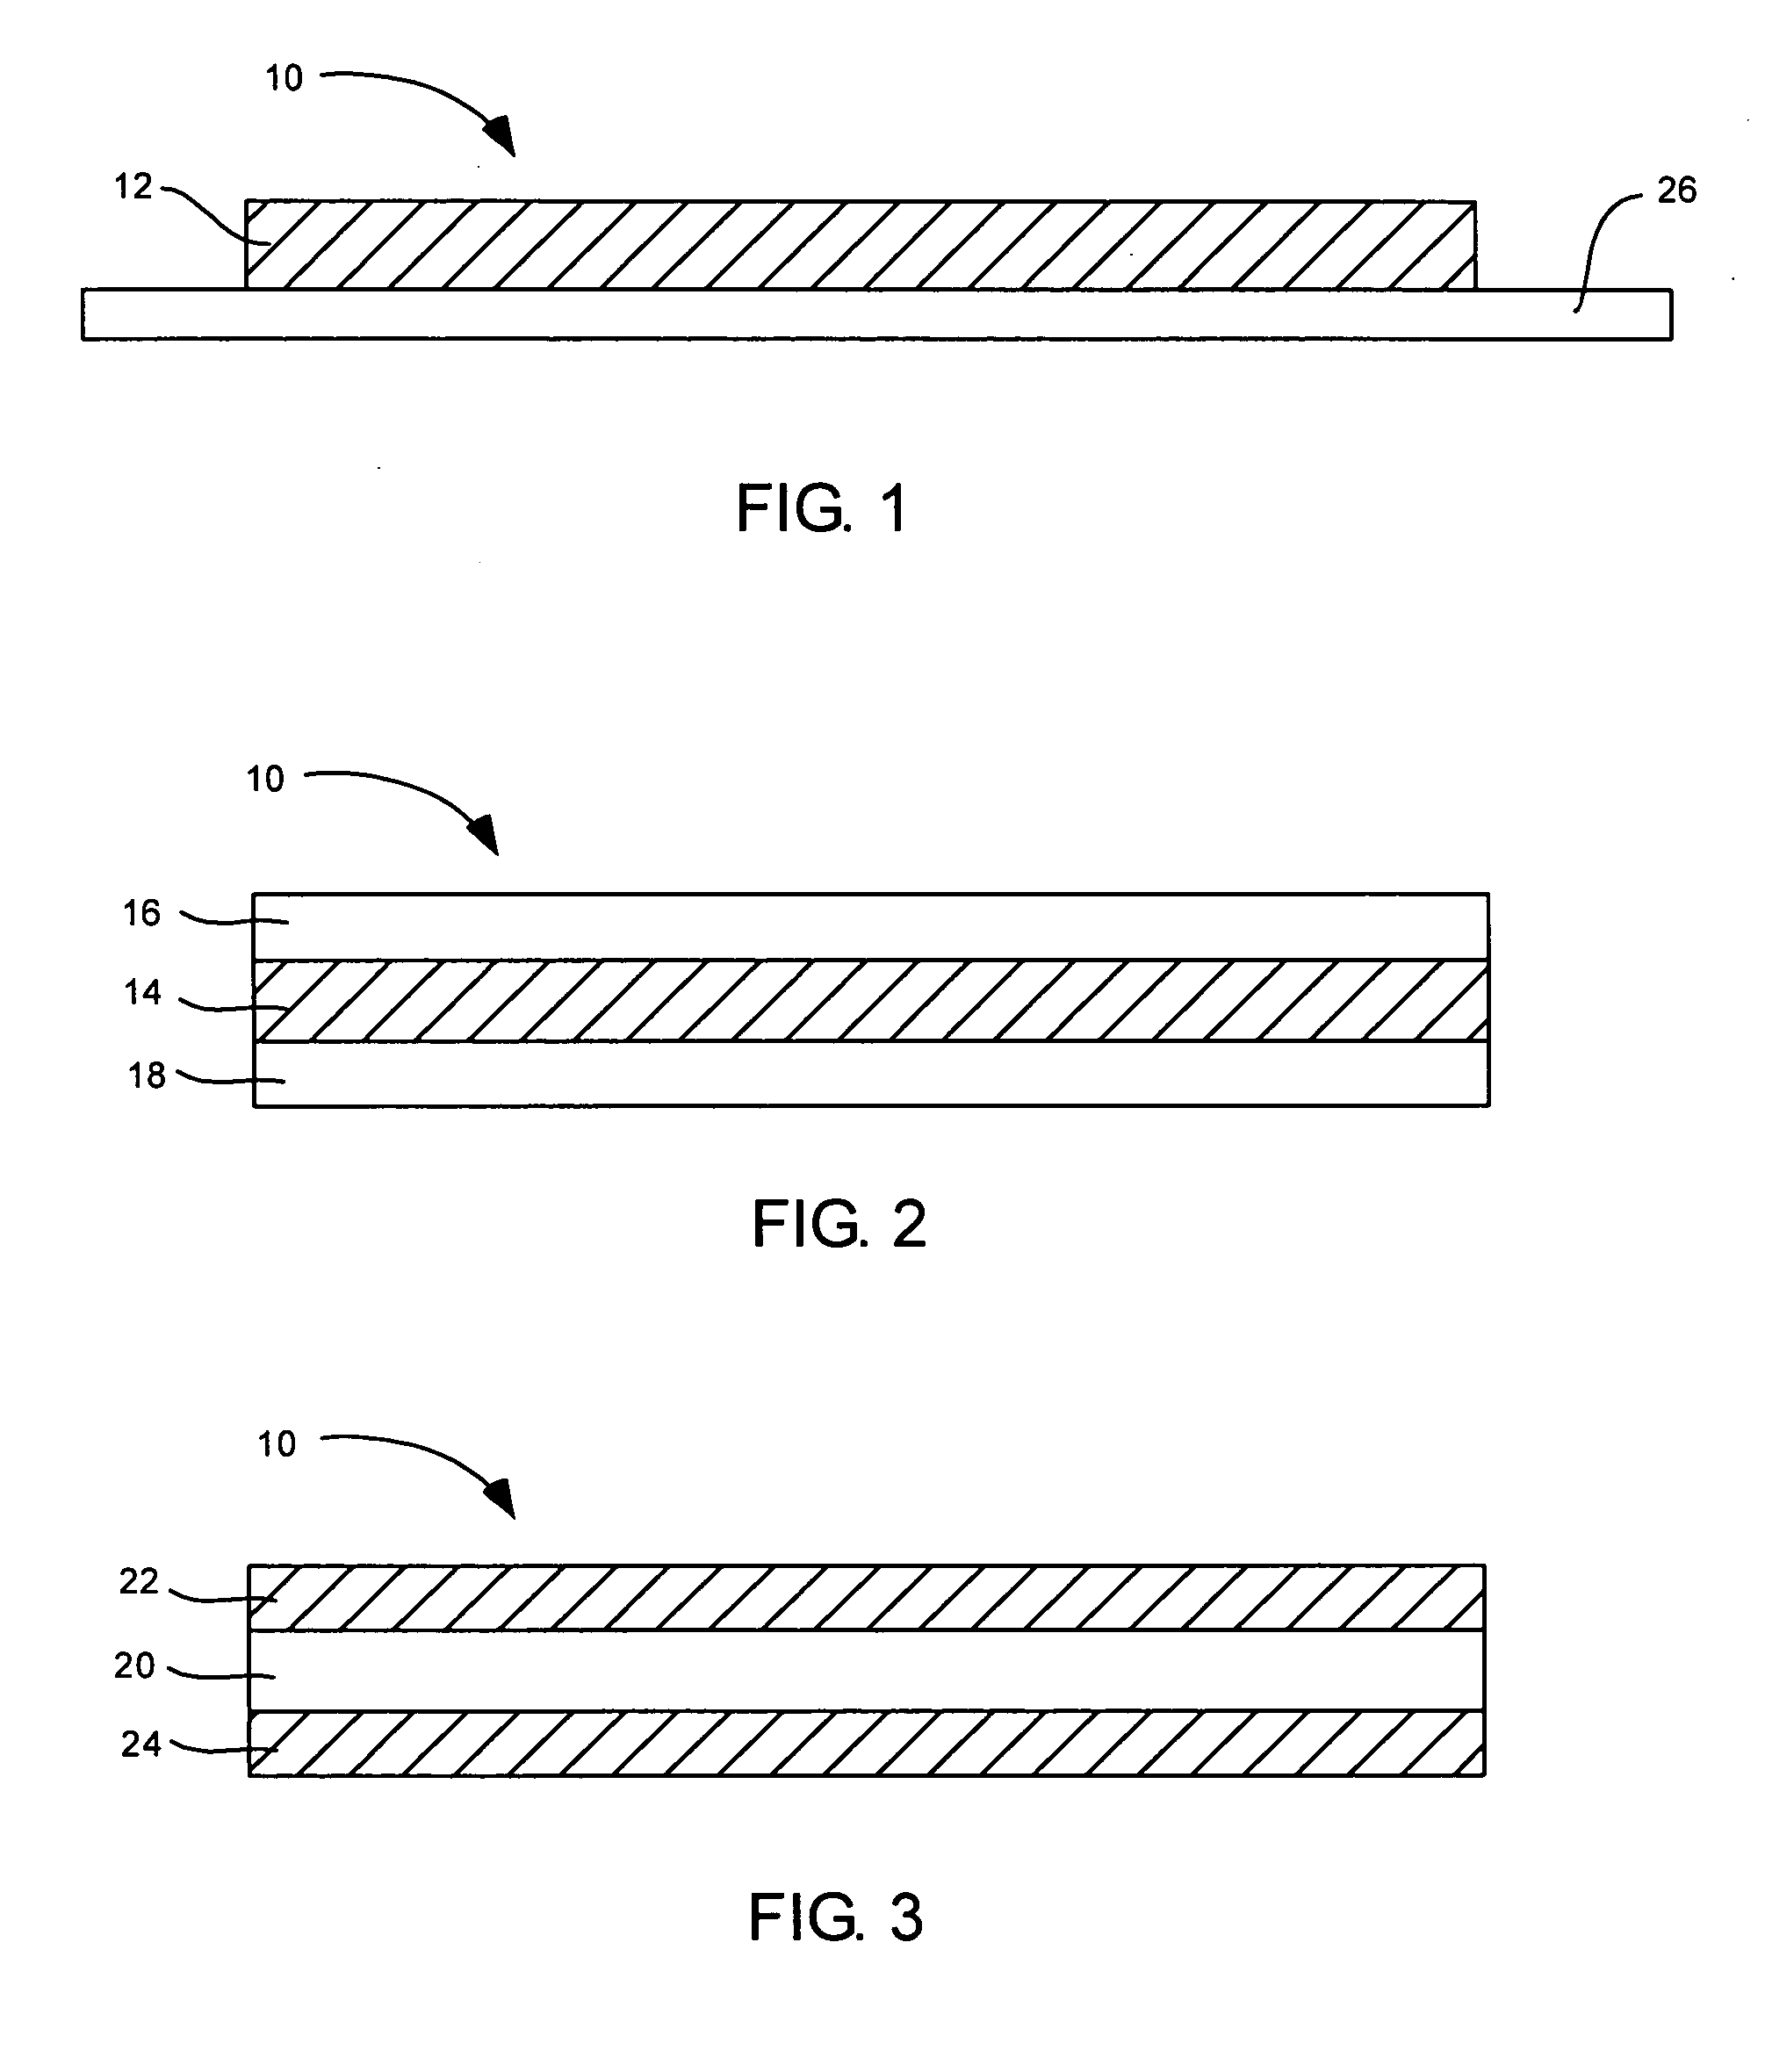 Graphite composite thermal sealants and associated methods